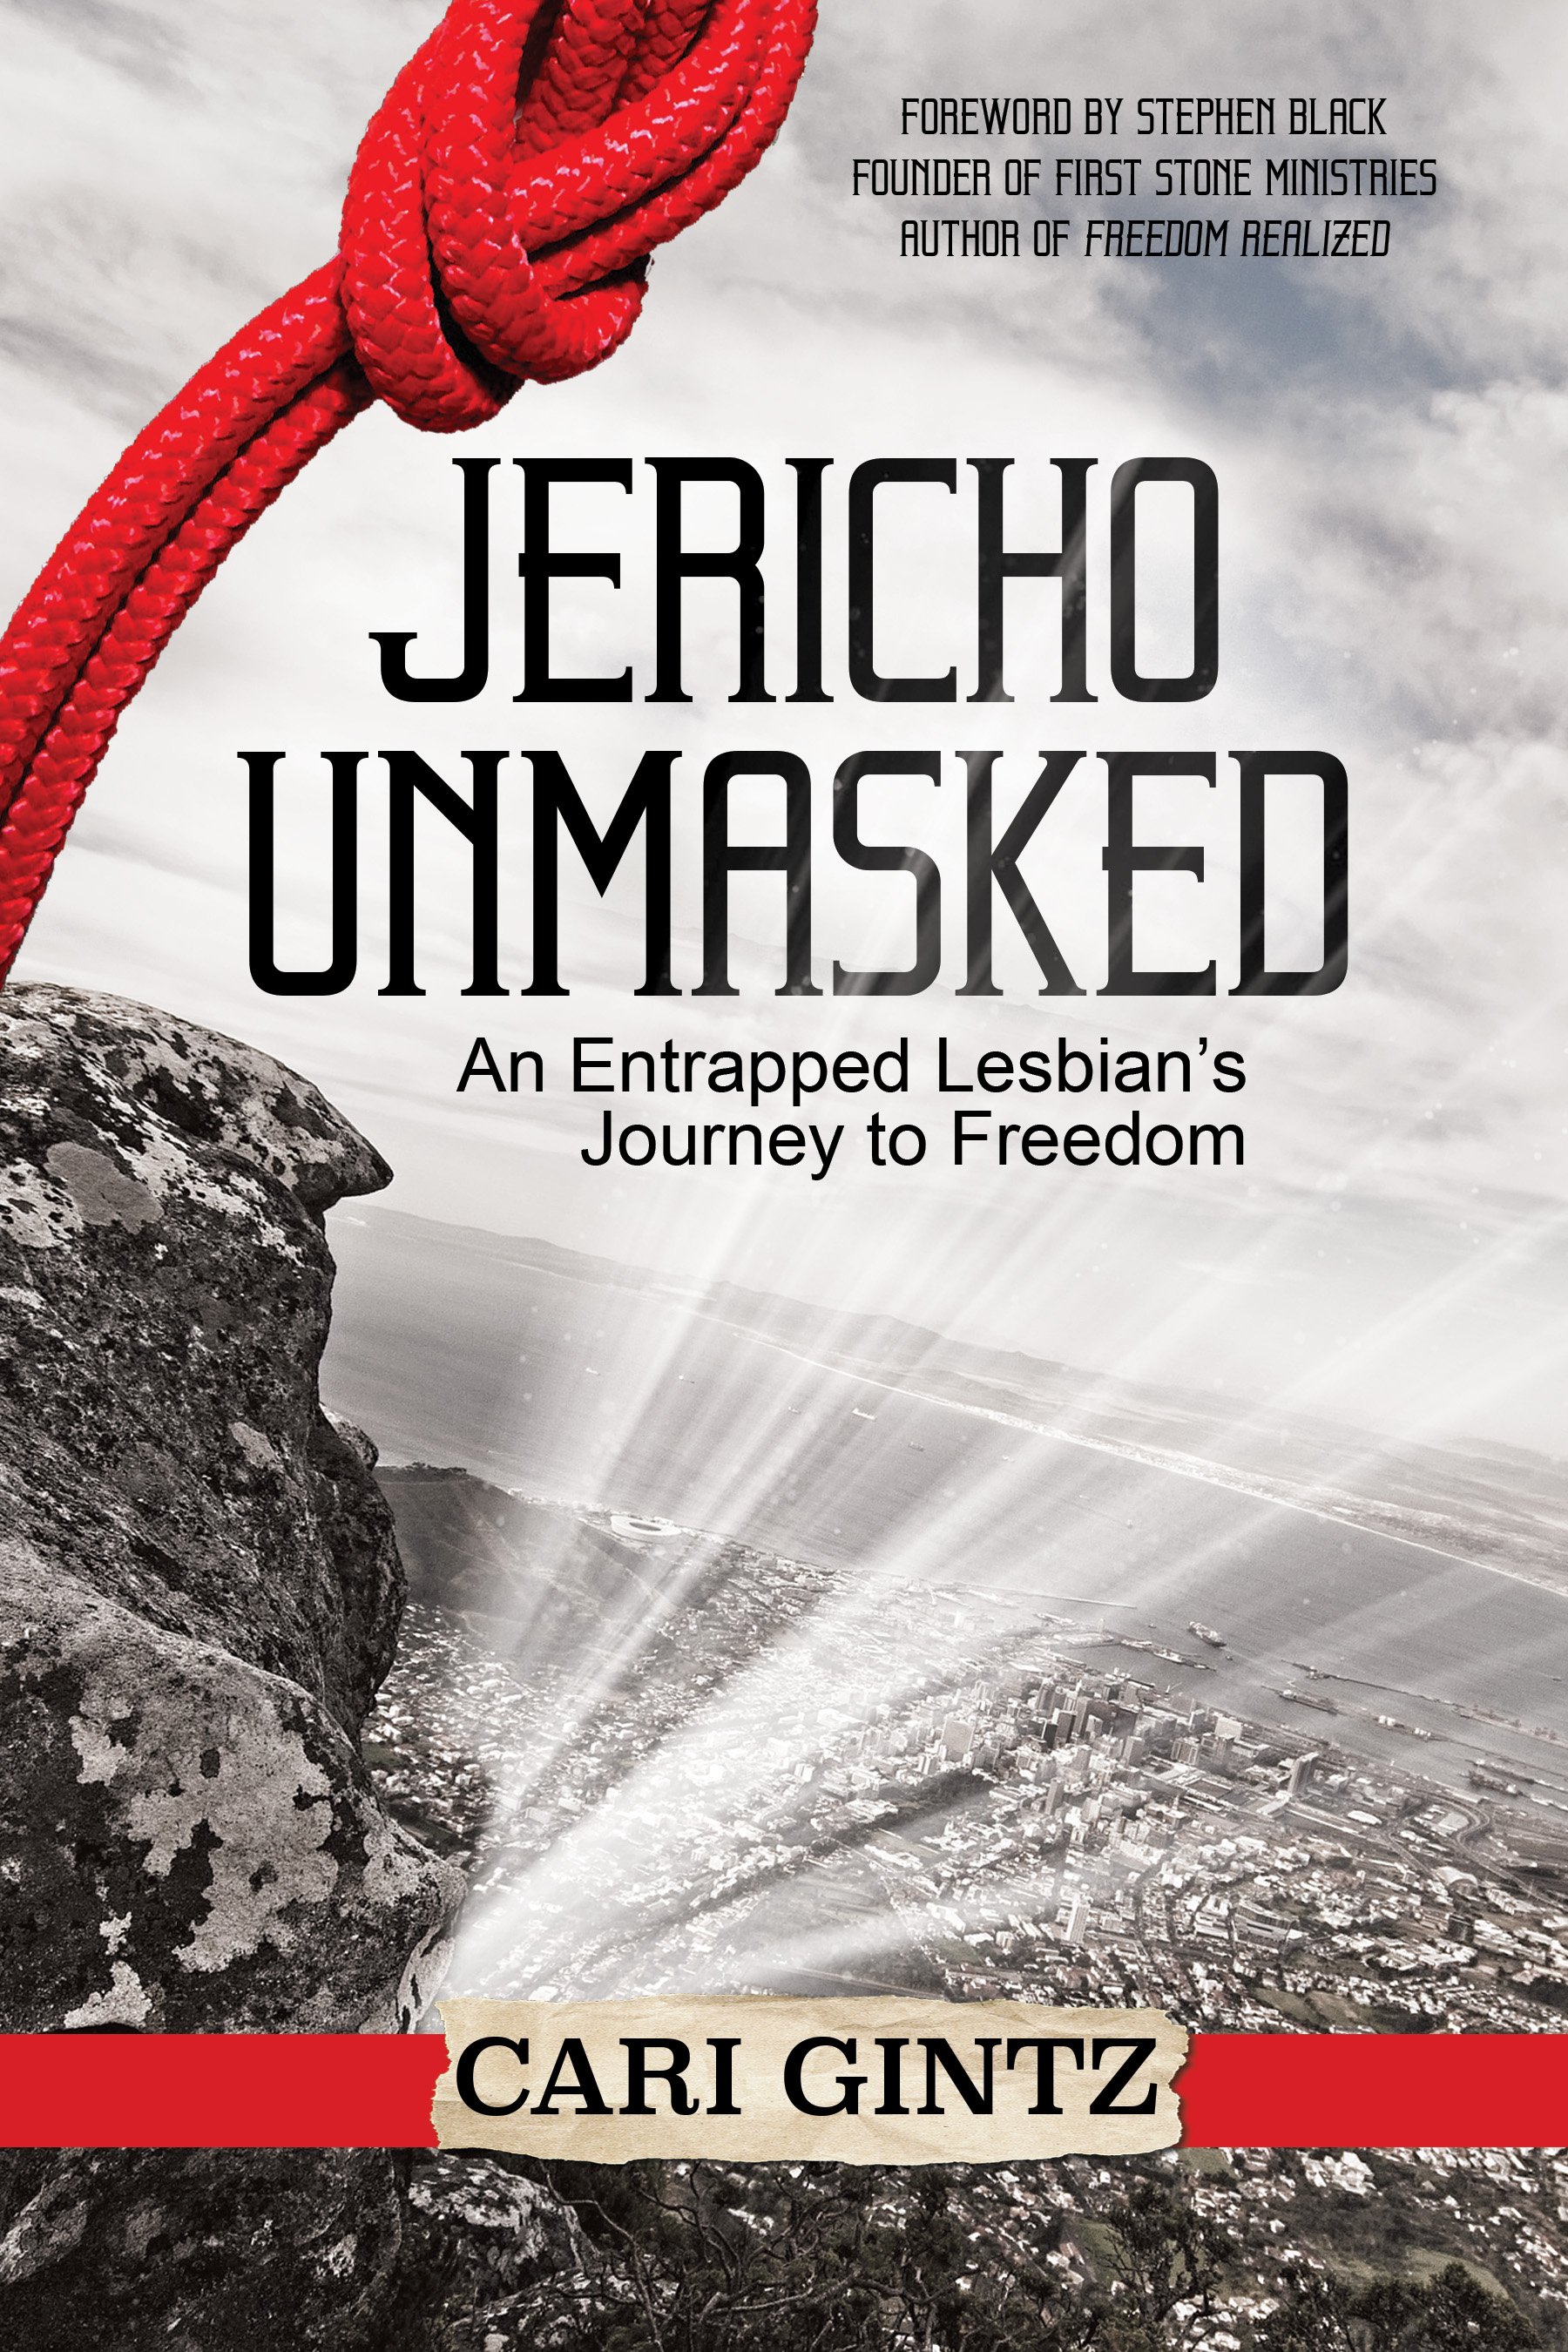 Jericho Unmasked – An Entrapped Lesbian’s Journey to Freedom